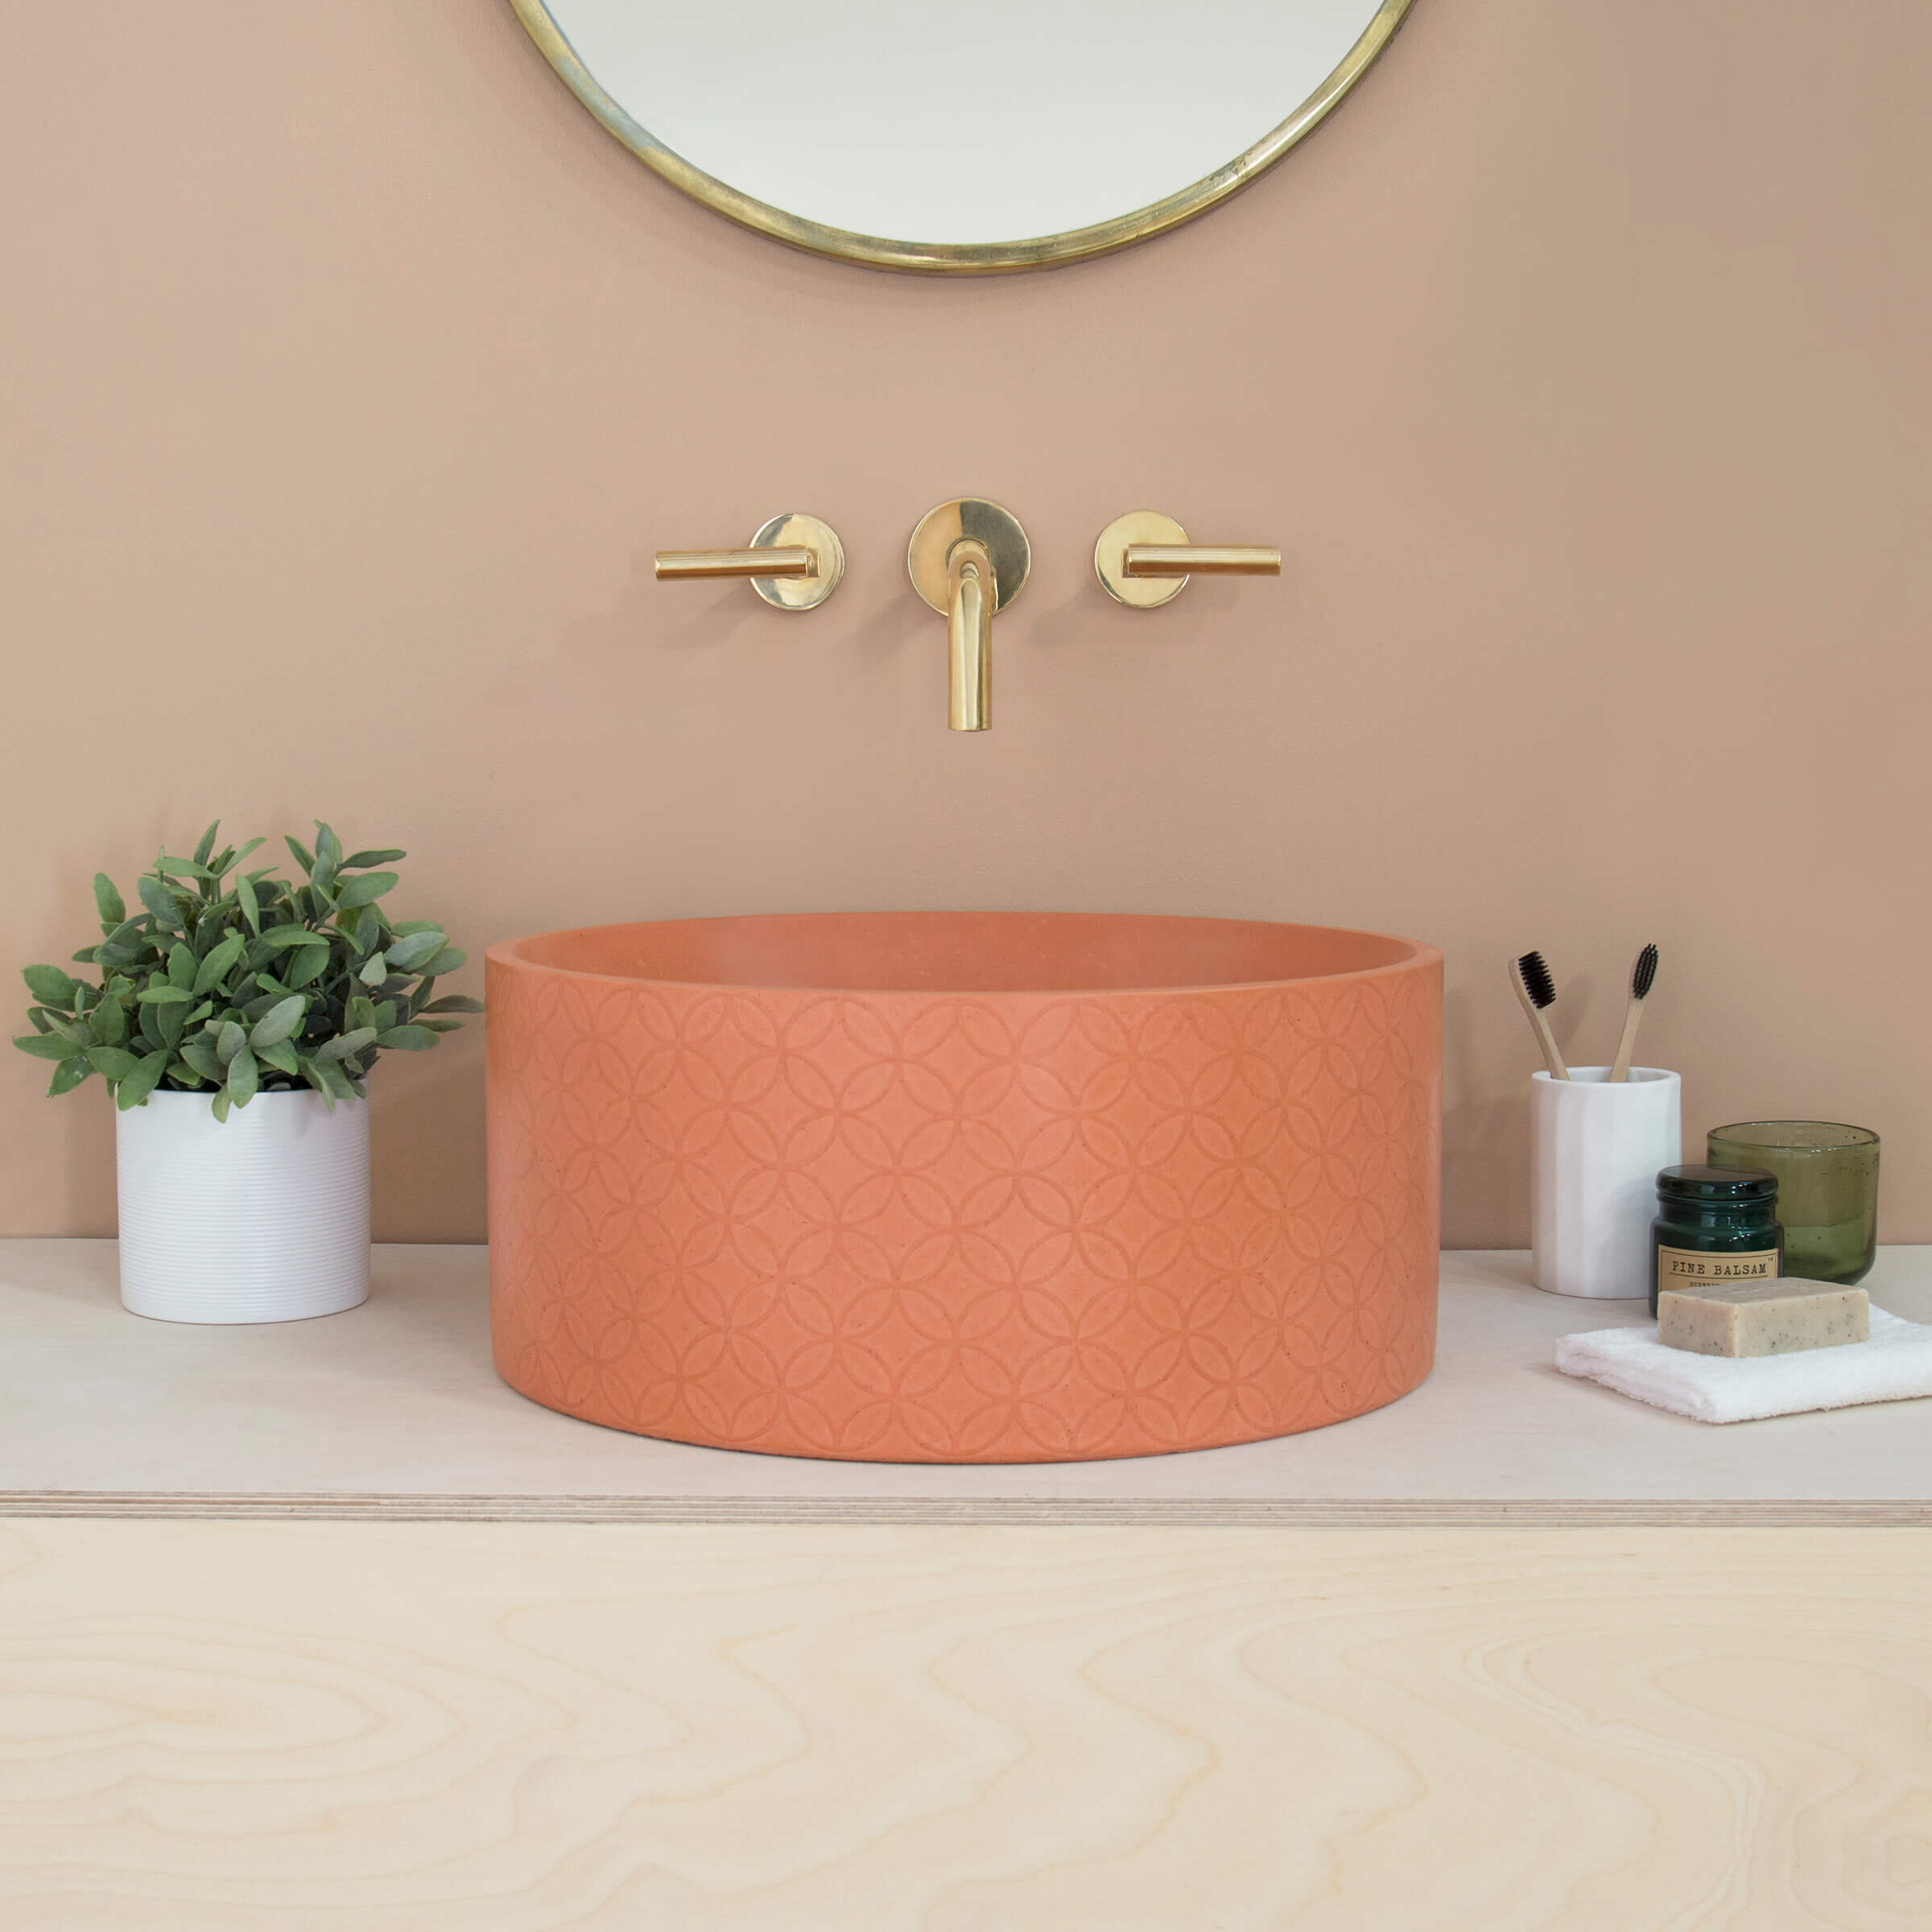 Orange, surface-mounted countertop concrete vessel basin sink with a bowl interior and decorative geometric surface pattern. (Copy)